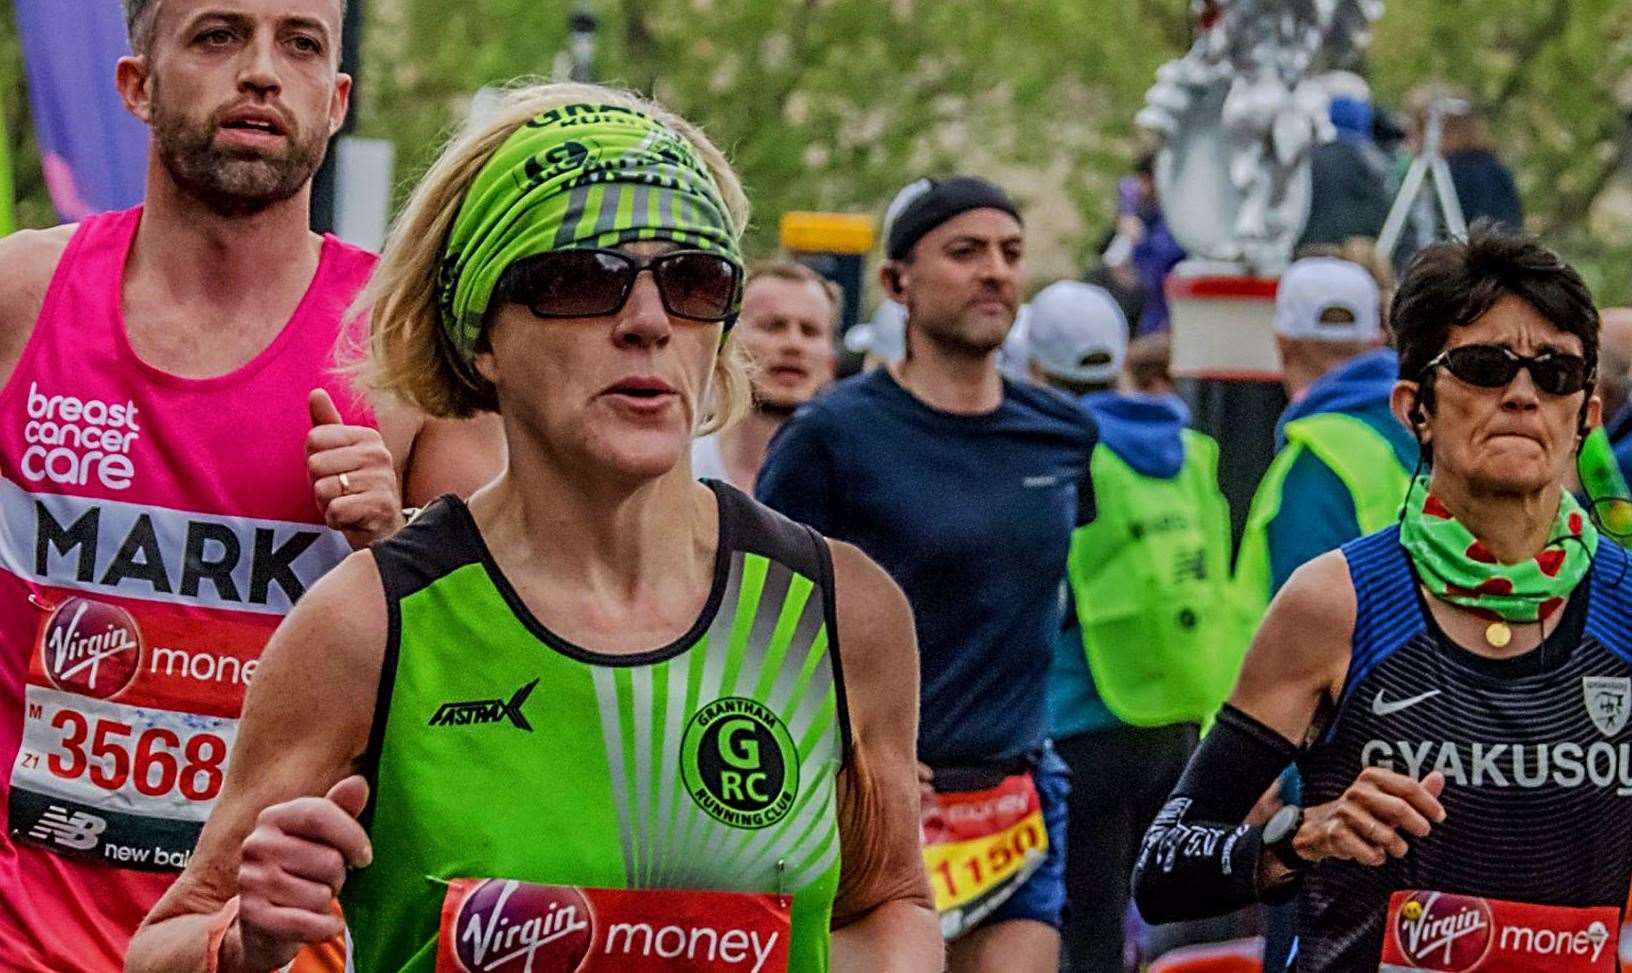 The London Marathon raised £64m for charity last year, but won't go ahead because of the pandemic Picture: Ruth Clements Photography